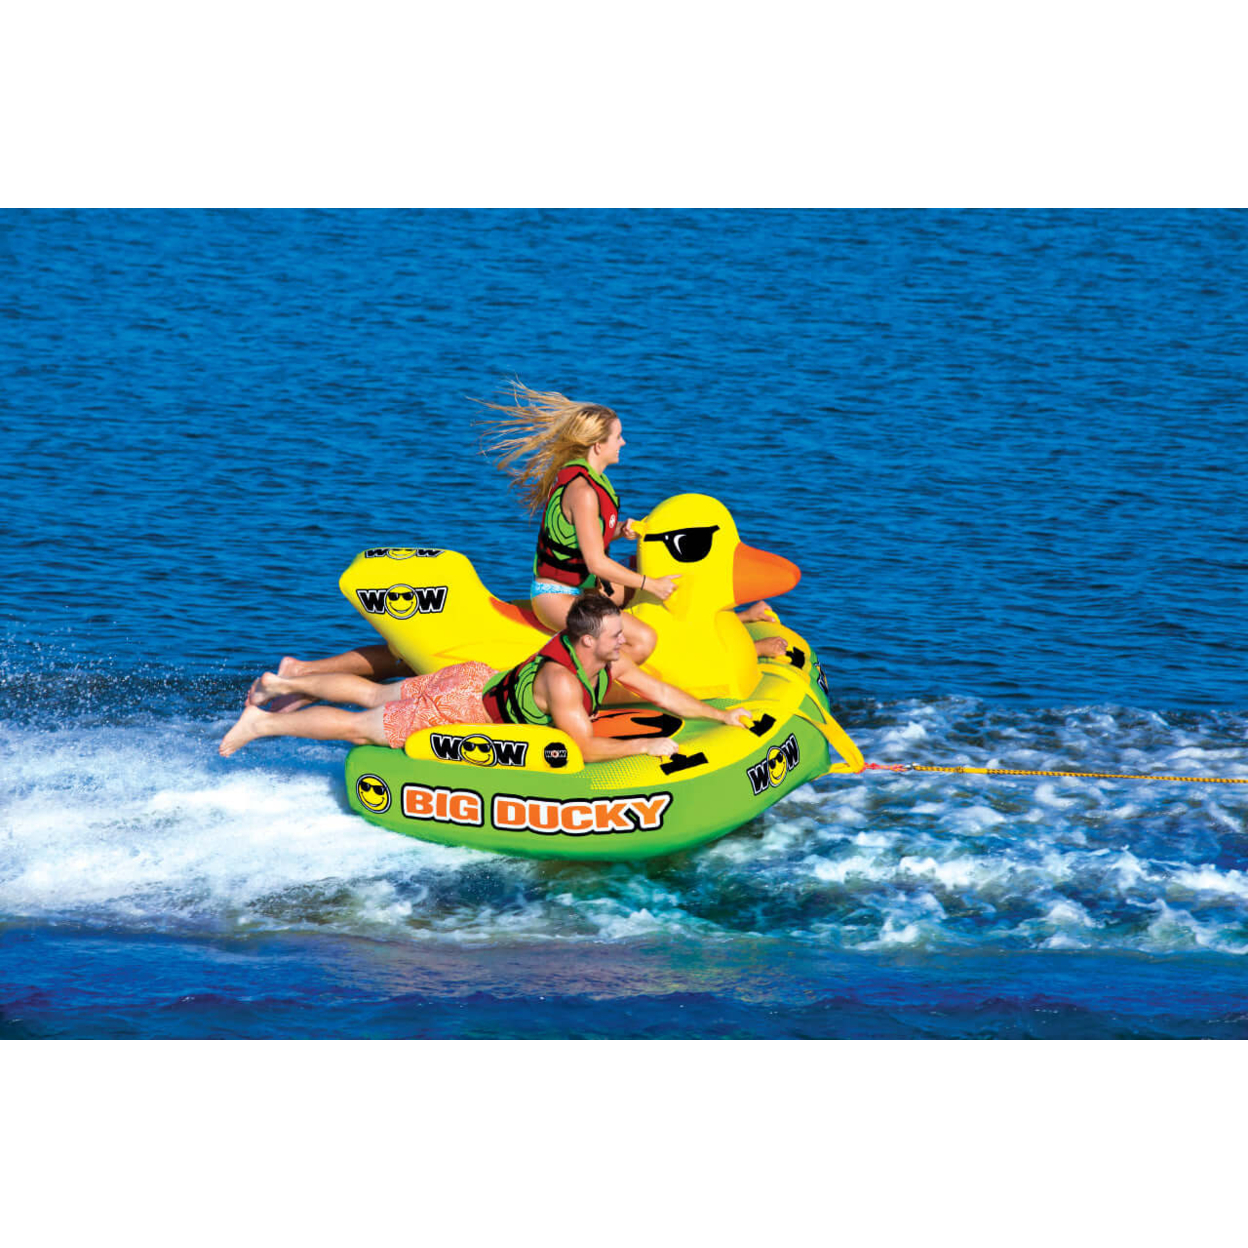 WOW Sports Big Ducky 3 Person Towable Water Tube For Pool And Lake (18-1140)